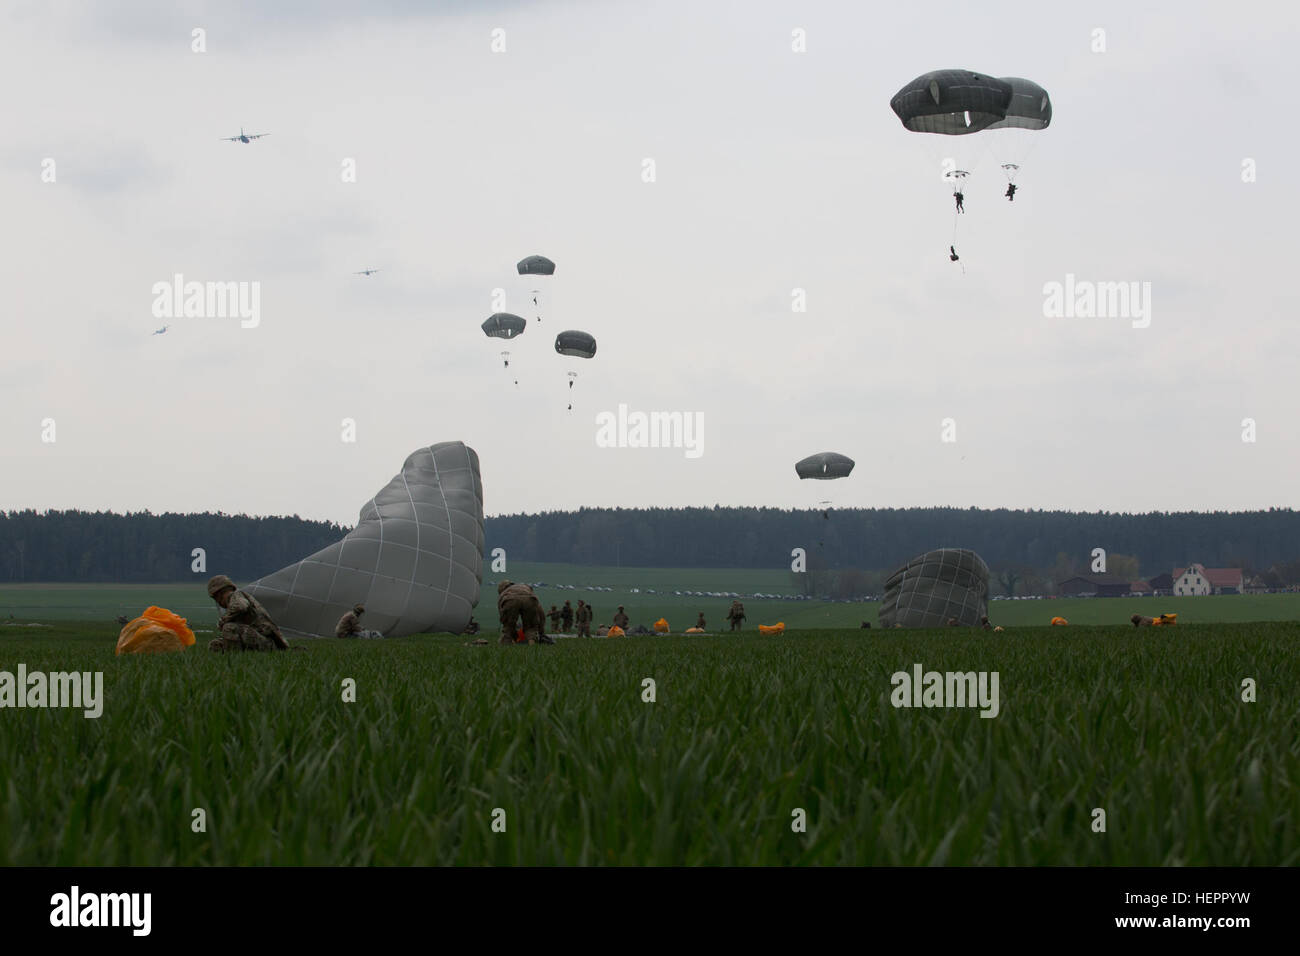 U.S. Soldiers of the 173rd Airborne Brigade parachute and secure gear while conducting an airborne operation during exercise Saber Junction 16 at the German Maneuver Rights Area outside Hohenfels, Germany, April 12, 2016. Saber Junction 16 is the U.S. Army Europe’s 173rd Airborne Brigade’s combat training center certification exercise, taking place at the JMRC in Hohenfels, Germany, Mar. 31-Apr. 24, 2016.  The exercise is designed to evaluate the readiness of the Army’s Europe-based combat brigades to conduct unified land operations and promote interoperability in a joint, multinational enviro Stock Photo